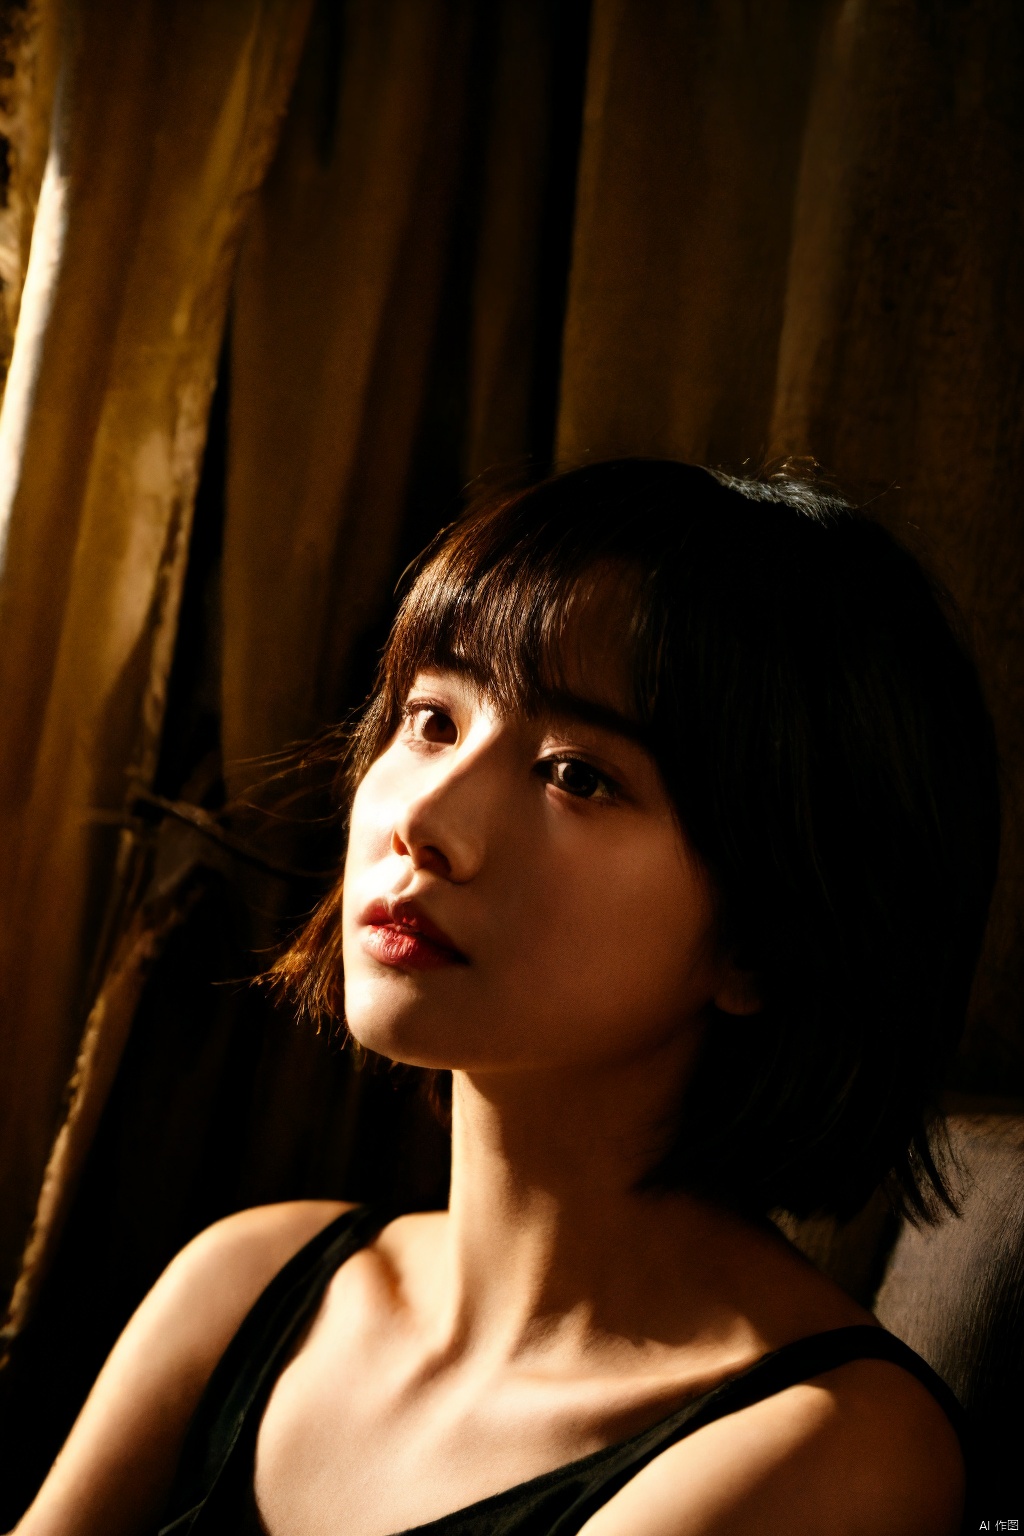  1 girl, looking at the audience alone, Flecks, shadows, short hair, Bangs, brown hair, black hair, bare shoulders, upper body, parted lips, lips, portraits, nose